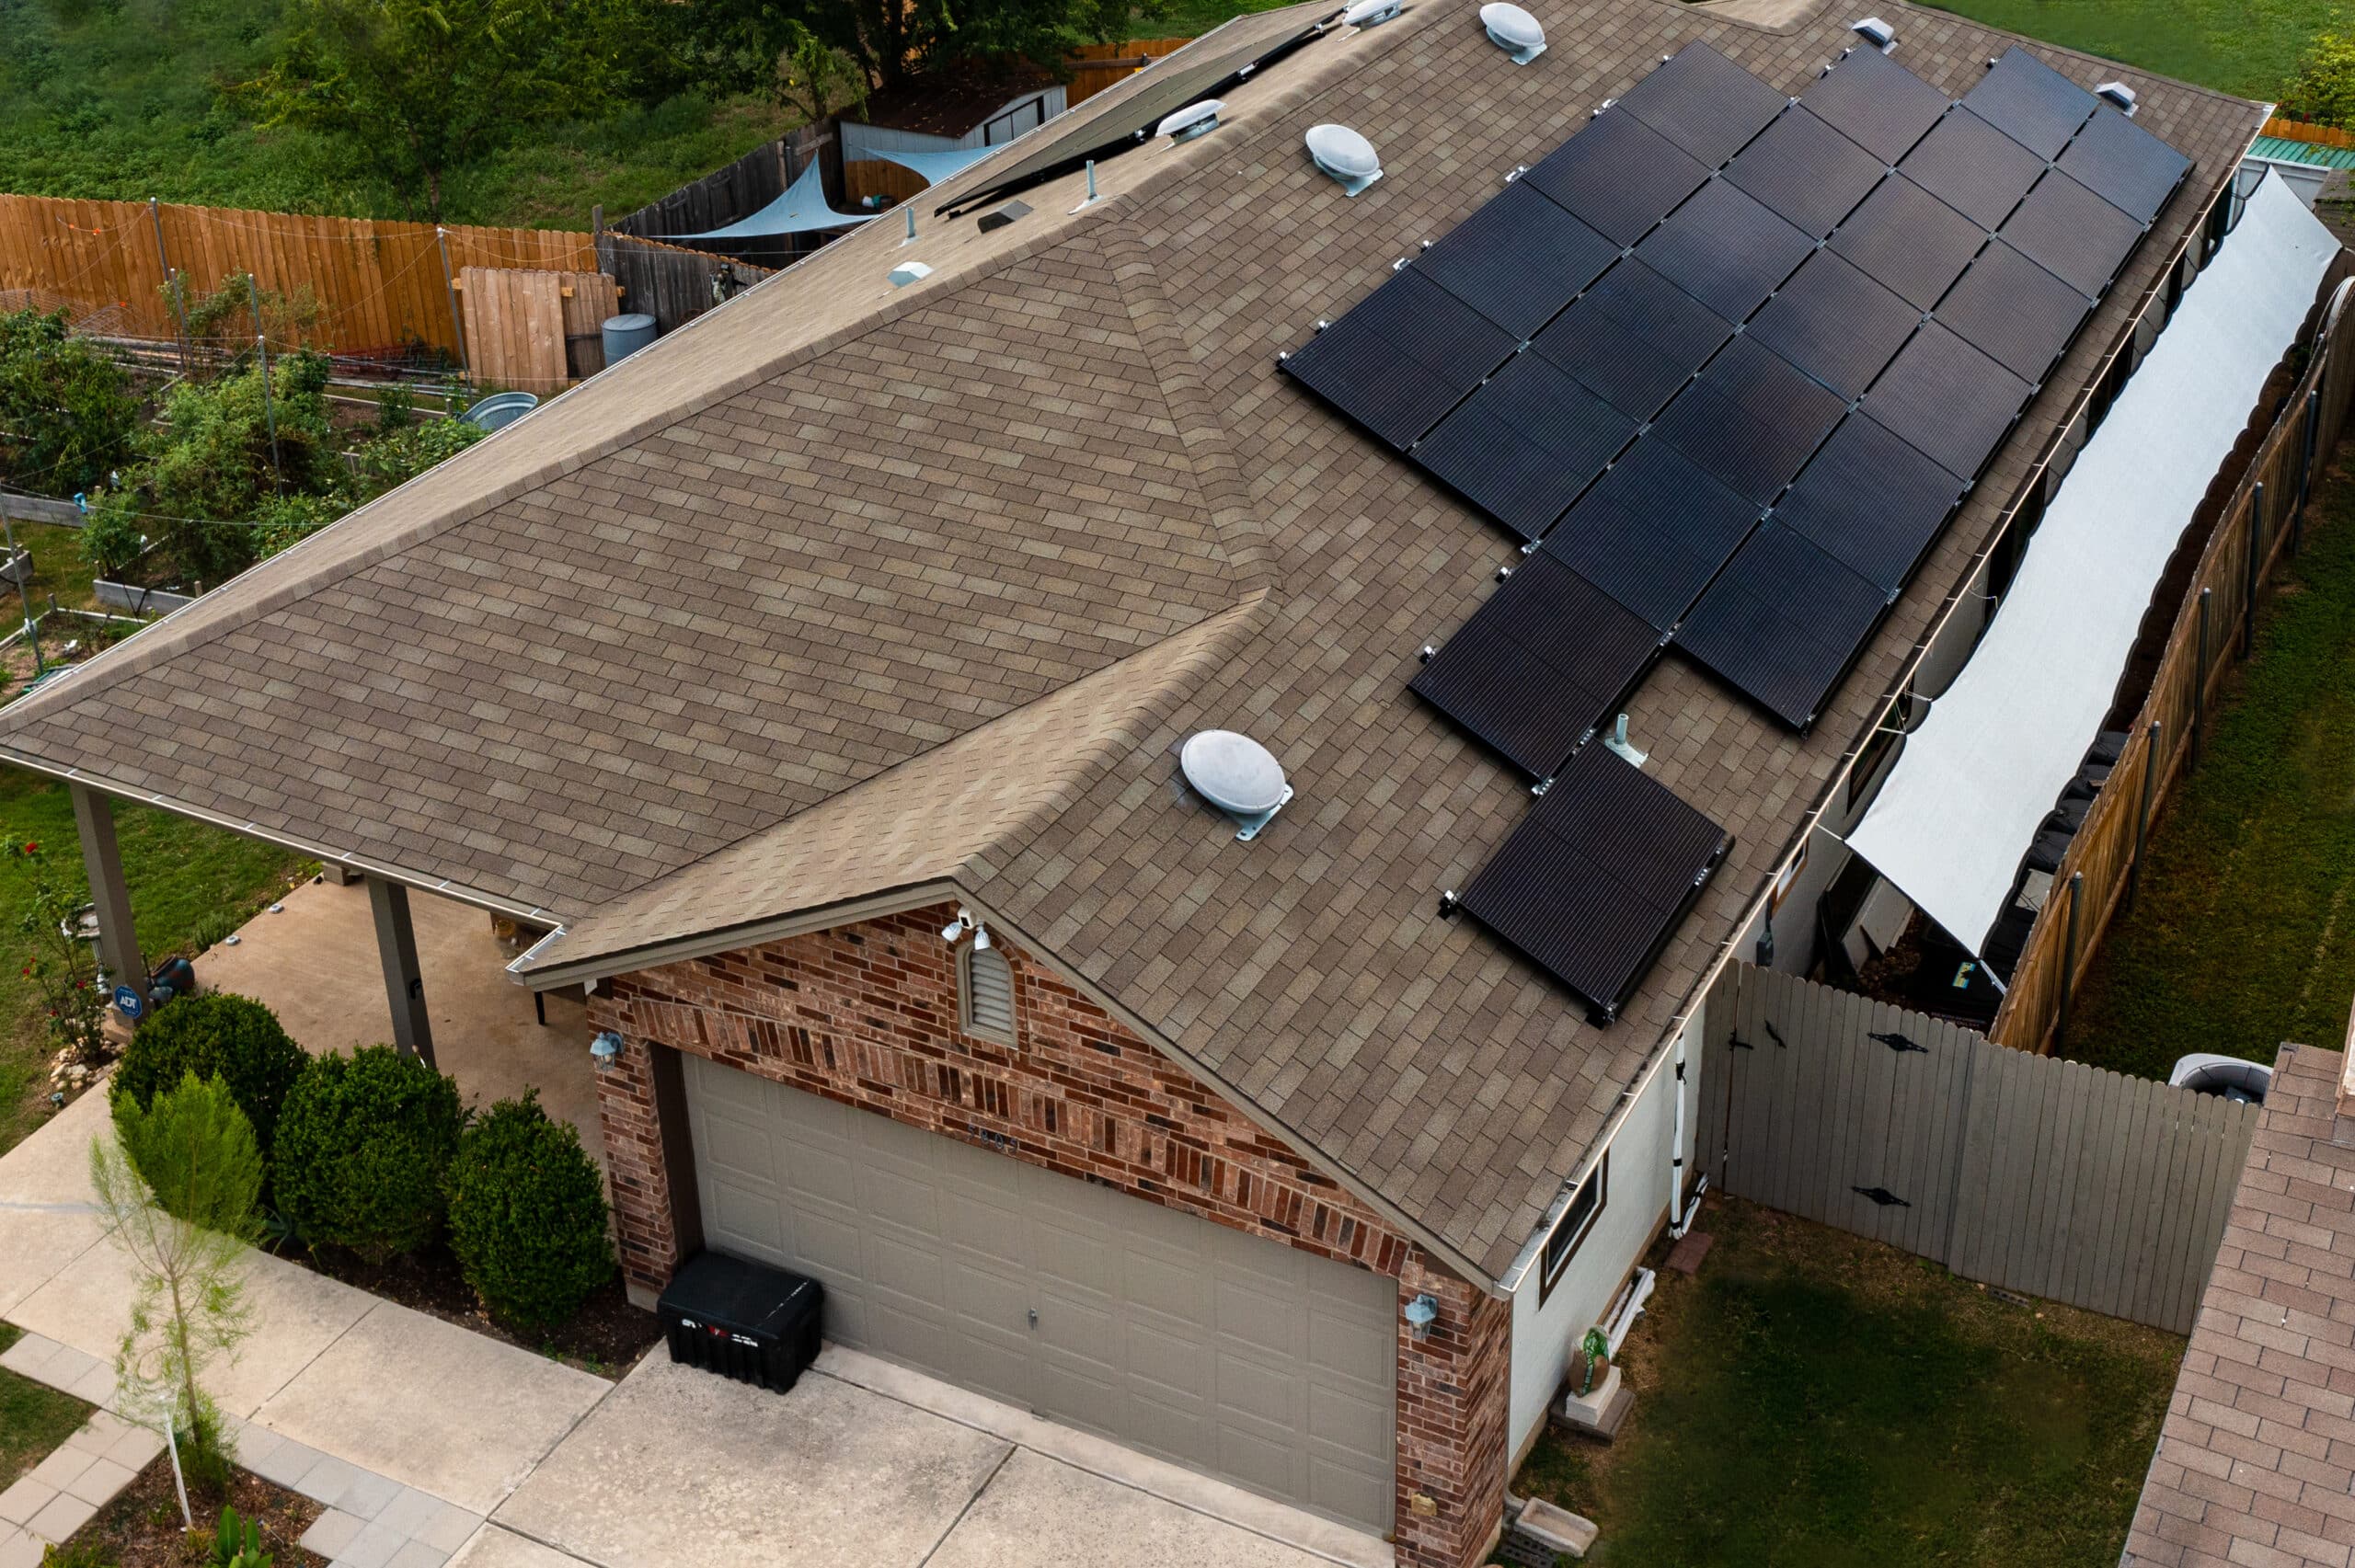 Brown roof featuring stylish black solar panels.